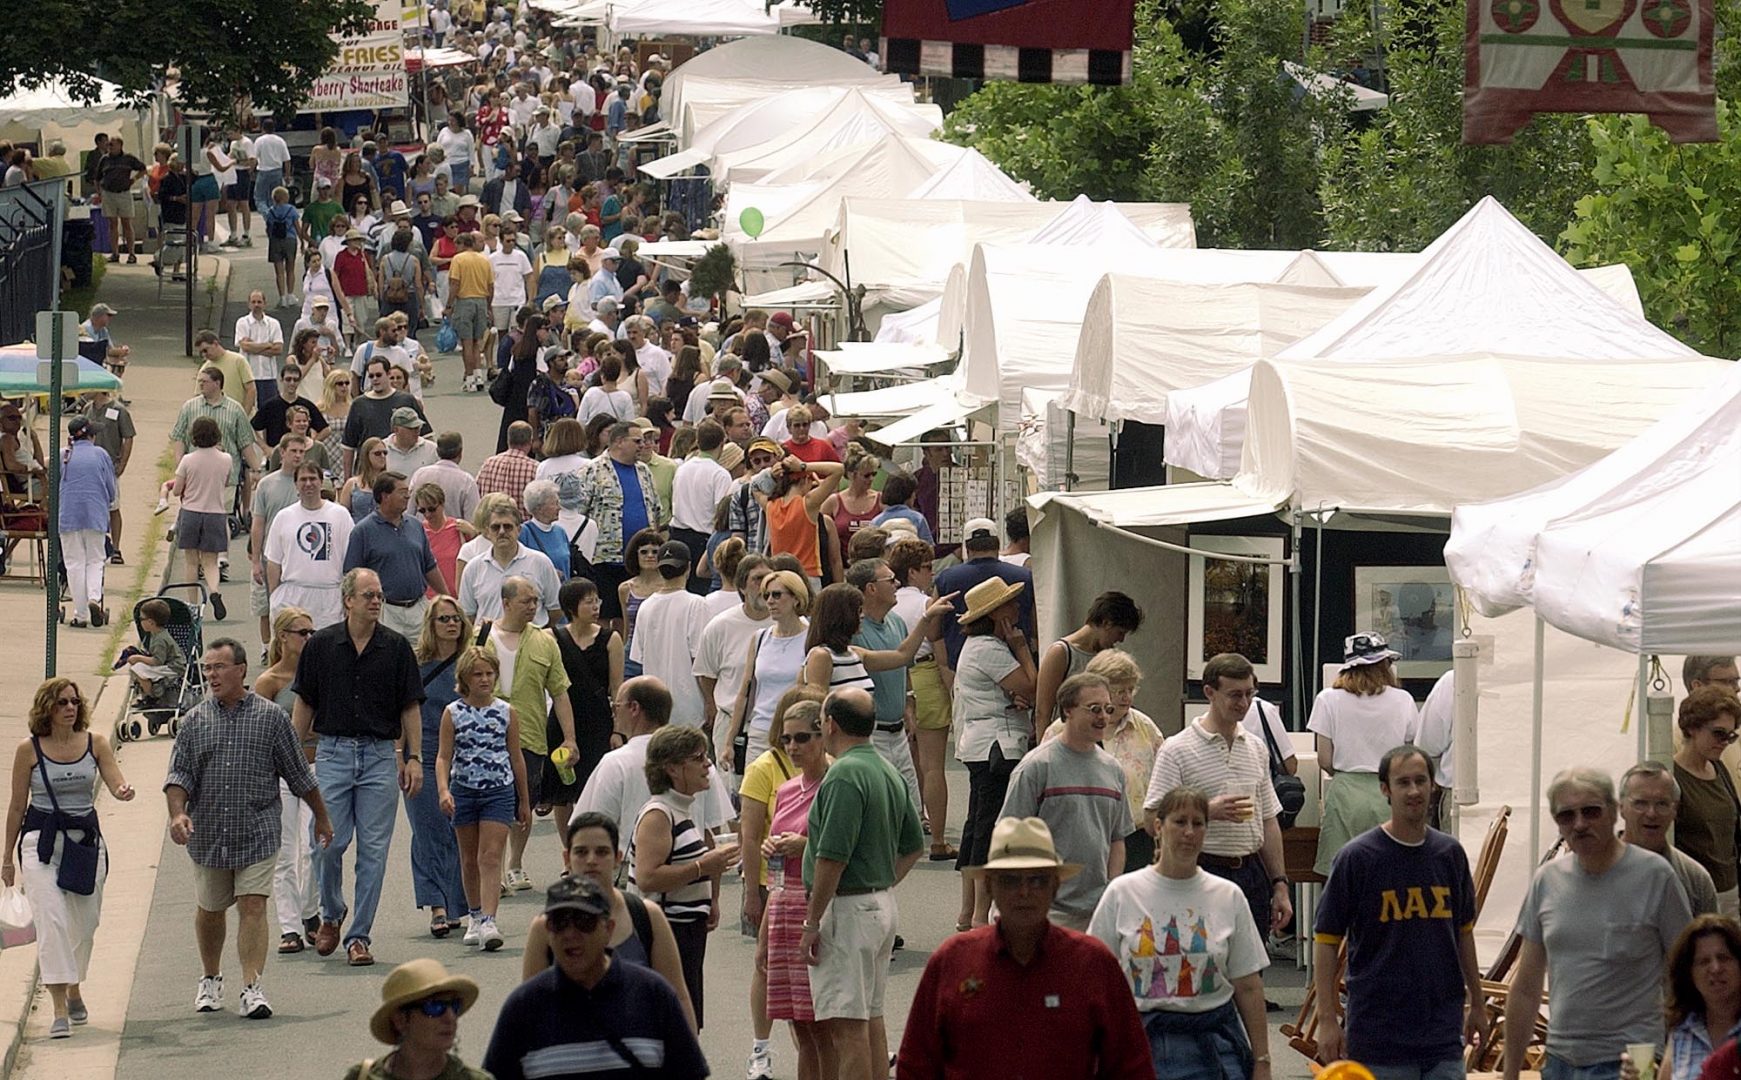 A crowded street at the Central Pennsylvania Festival of the Arts in State College, Pa. on Saturday, July 13, 2002. The festival ends on Sunday afternoon. (AP Photo/Pat Little)